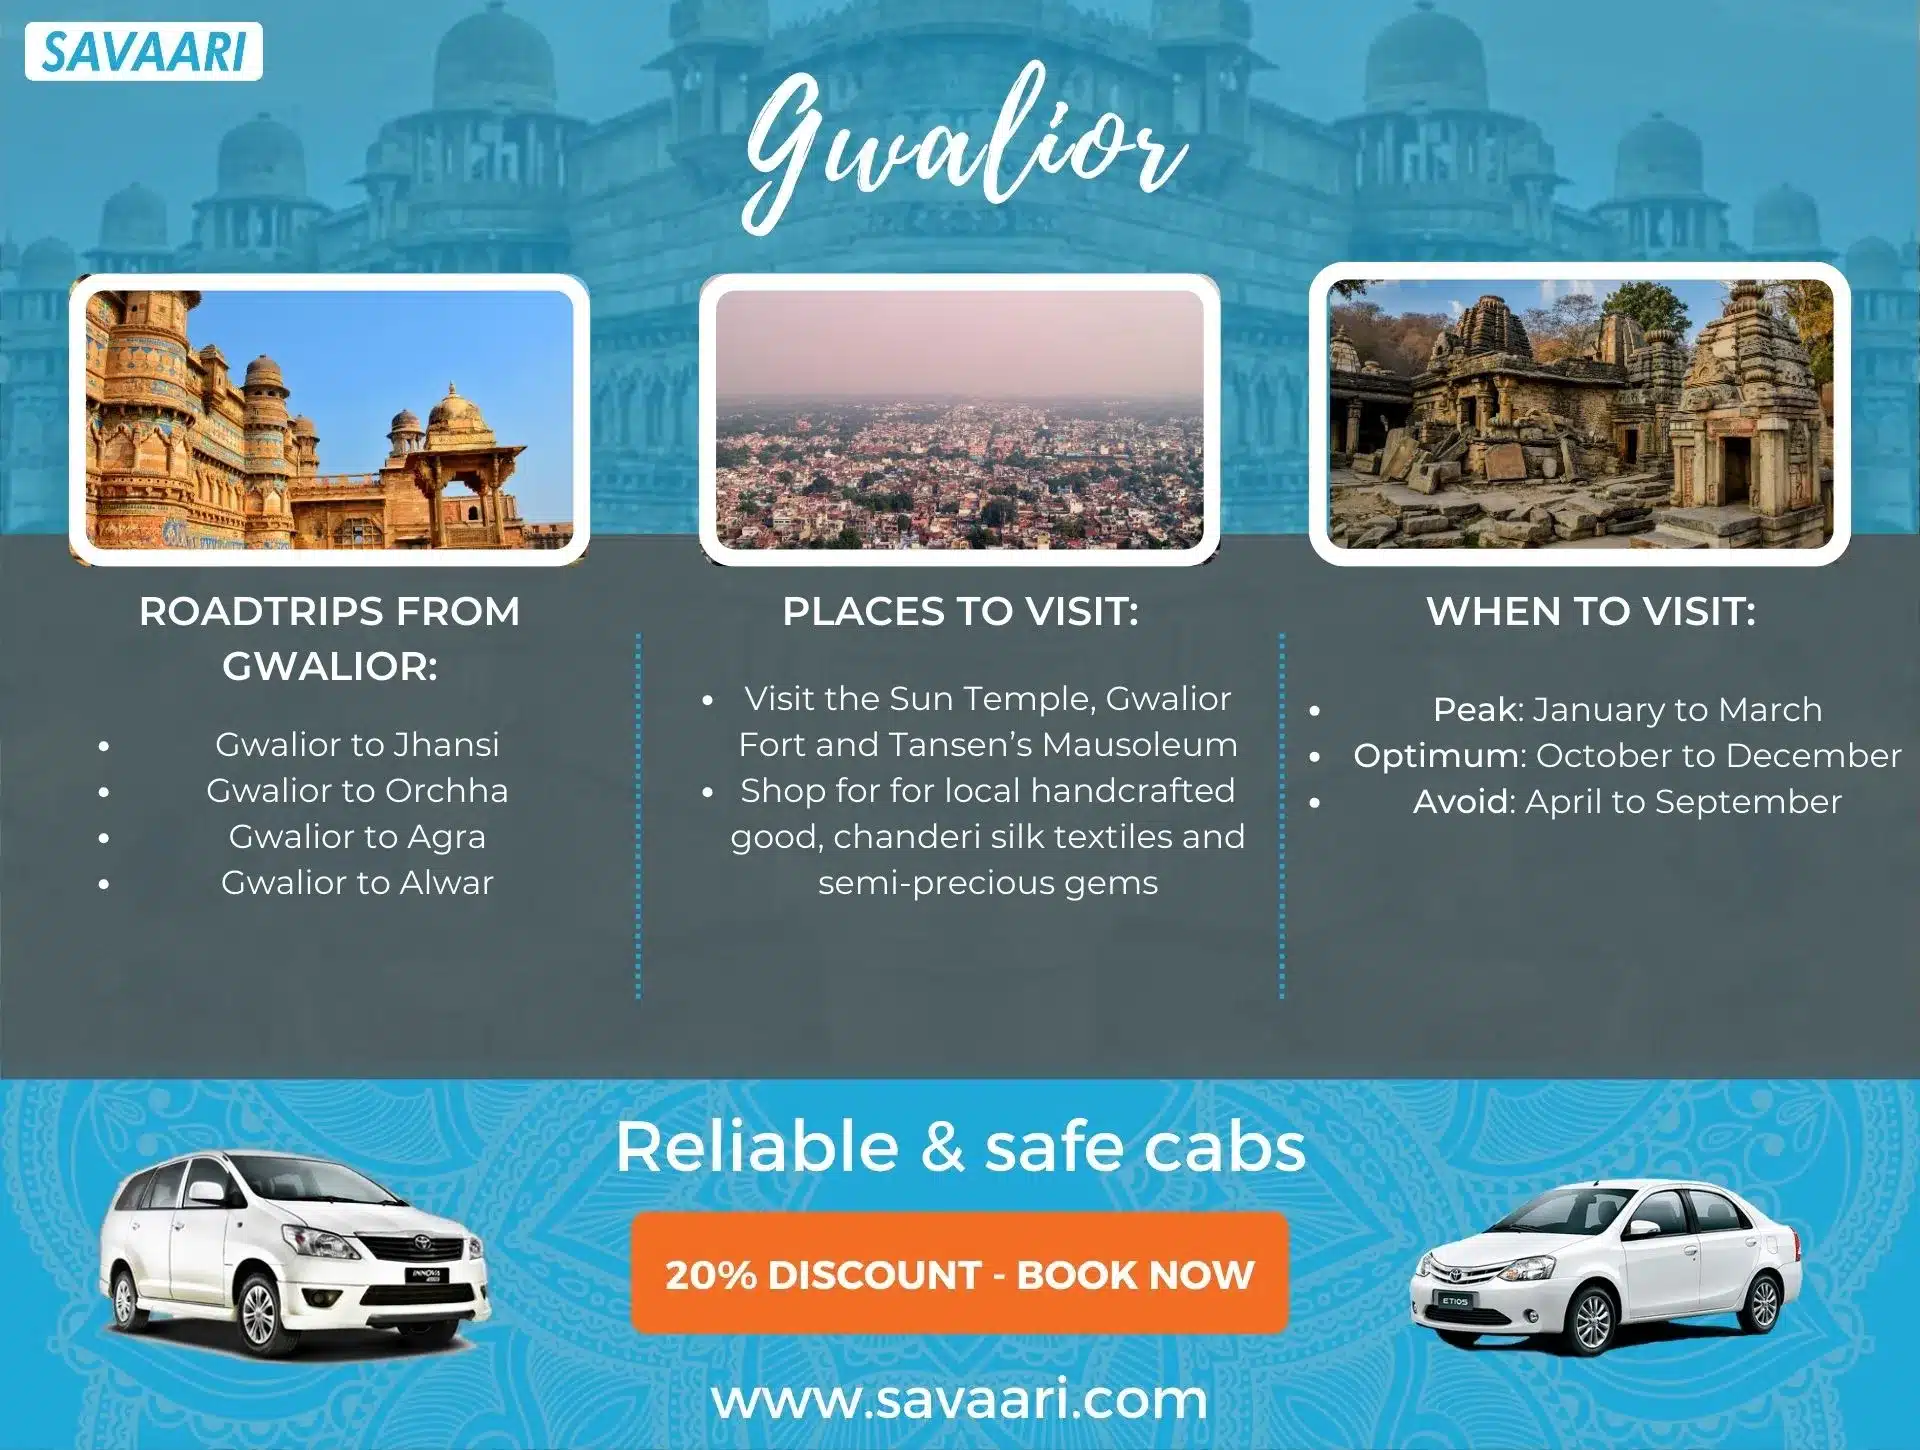 Things to do in Gwalior